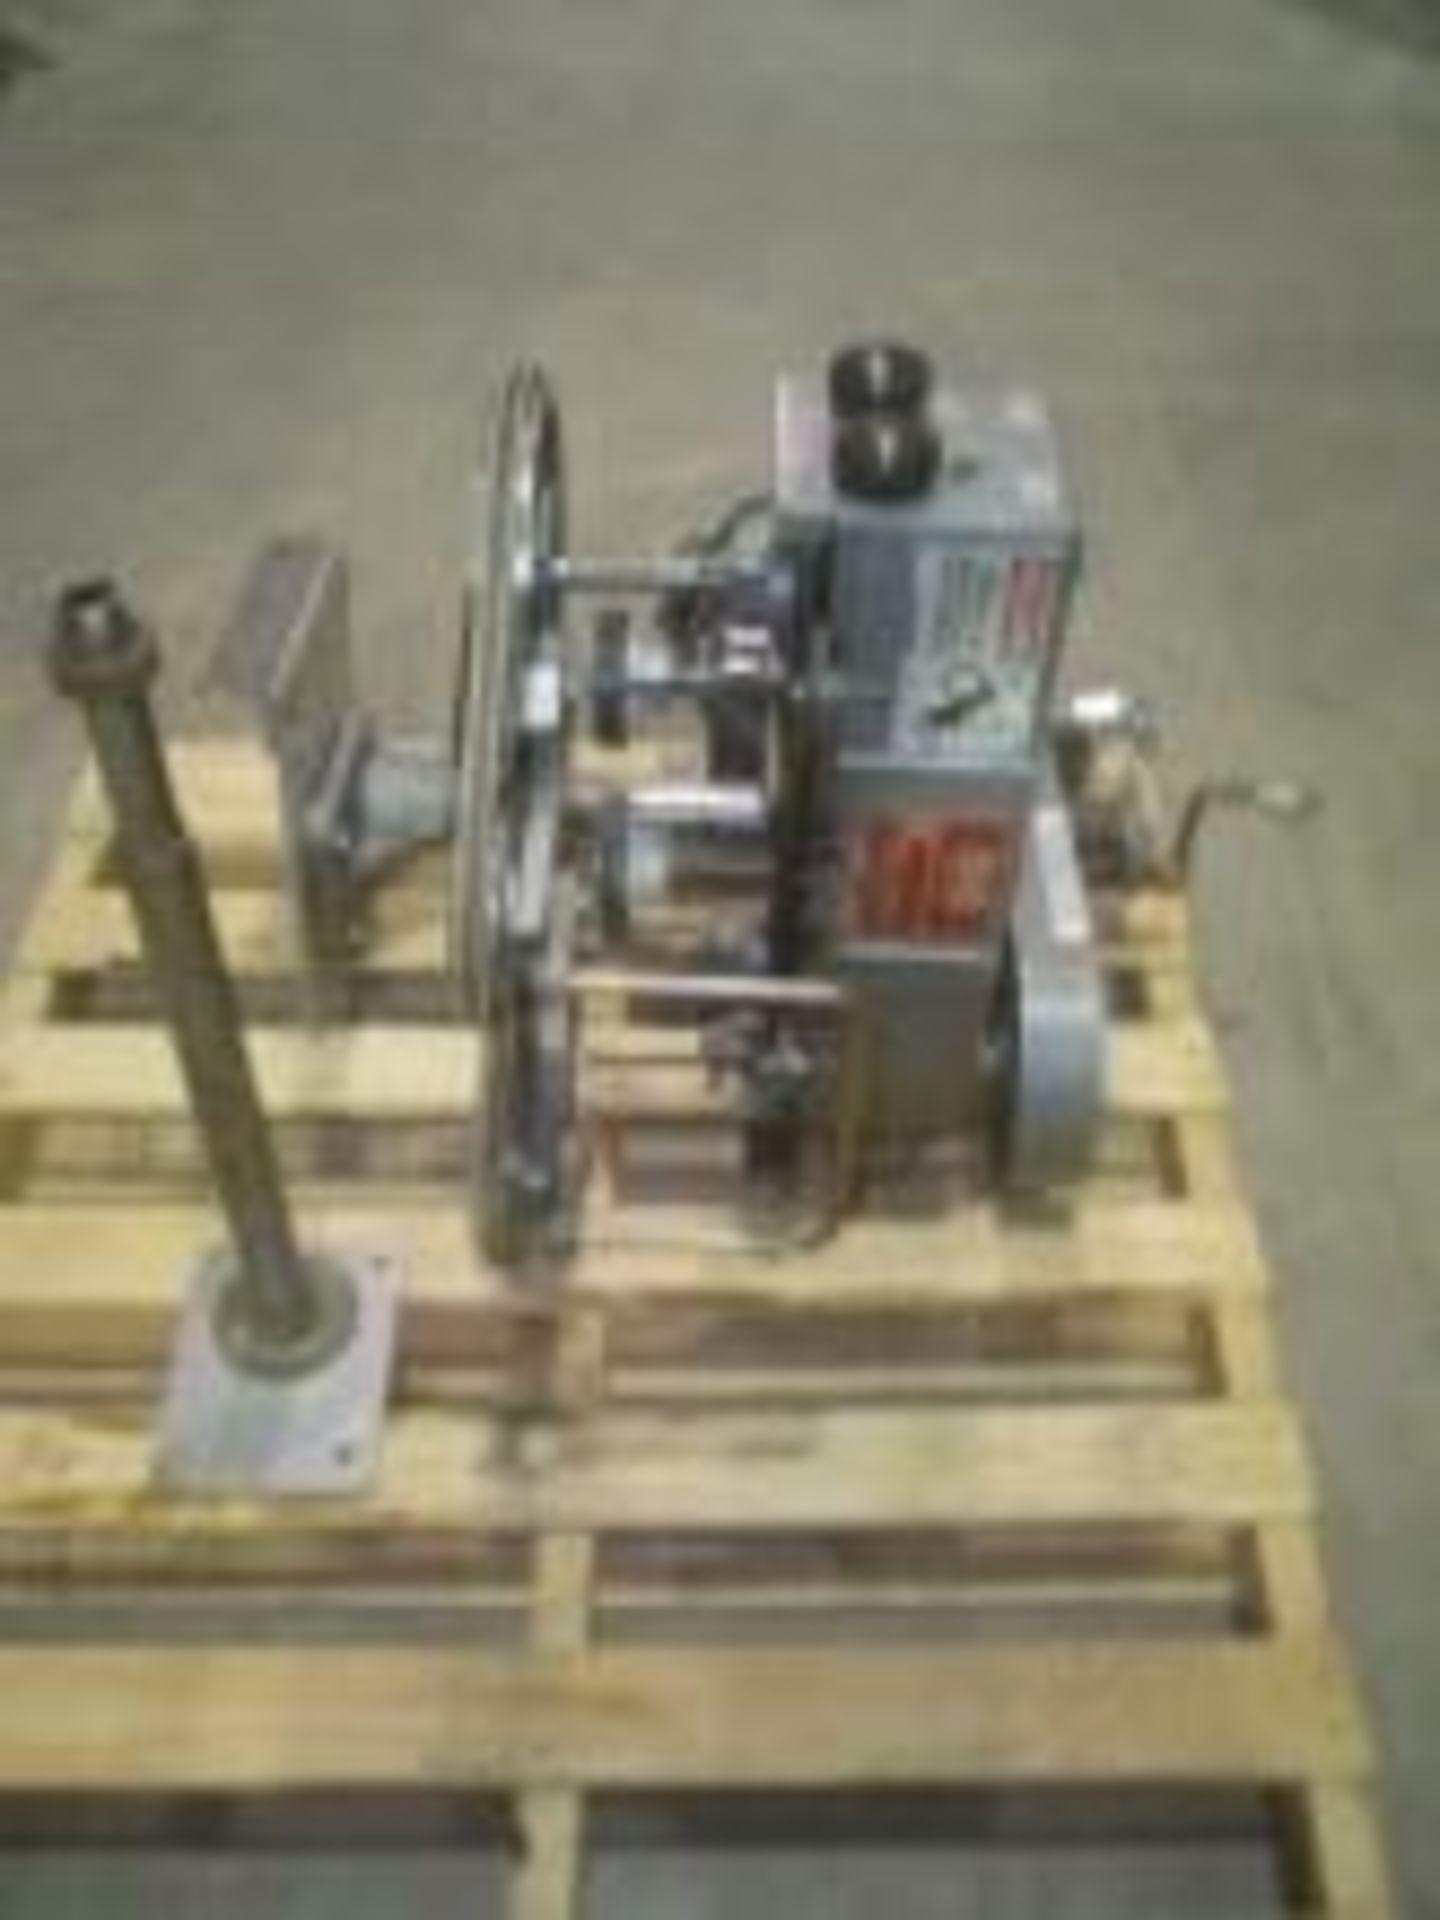 Used Kinsley Corp. Roll Tite Cap Tightener (Retorquer). Electrics: 125Volts, 20 Amps. Load Out Fee: